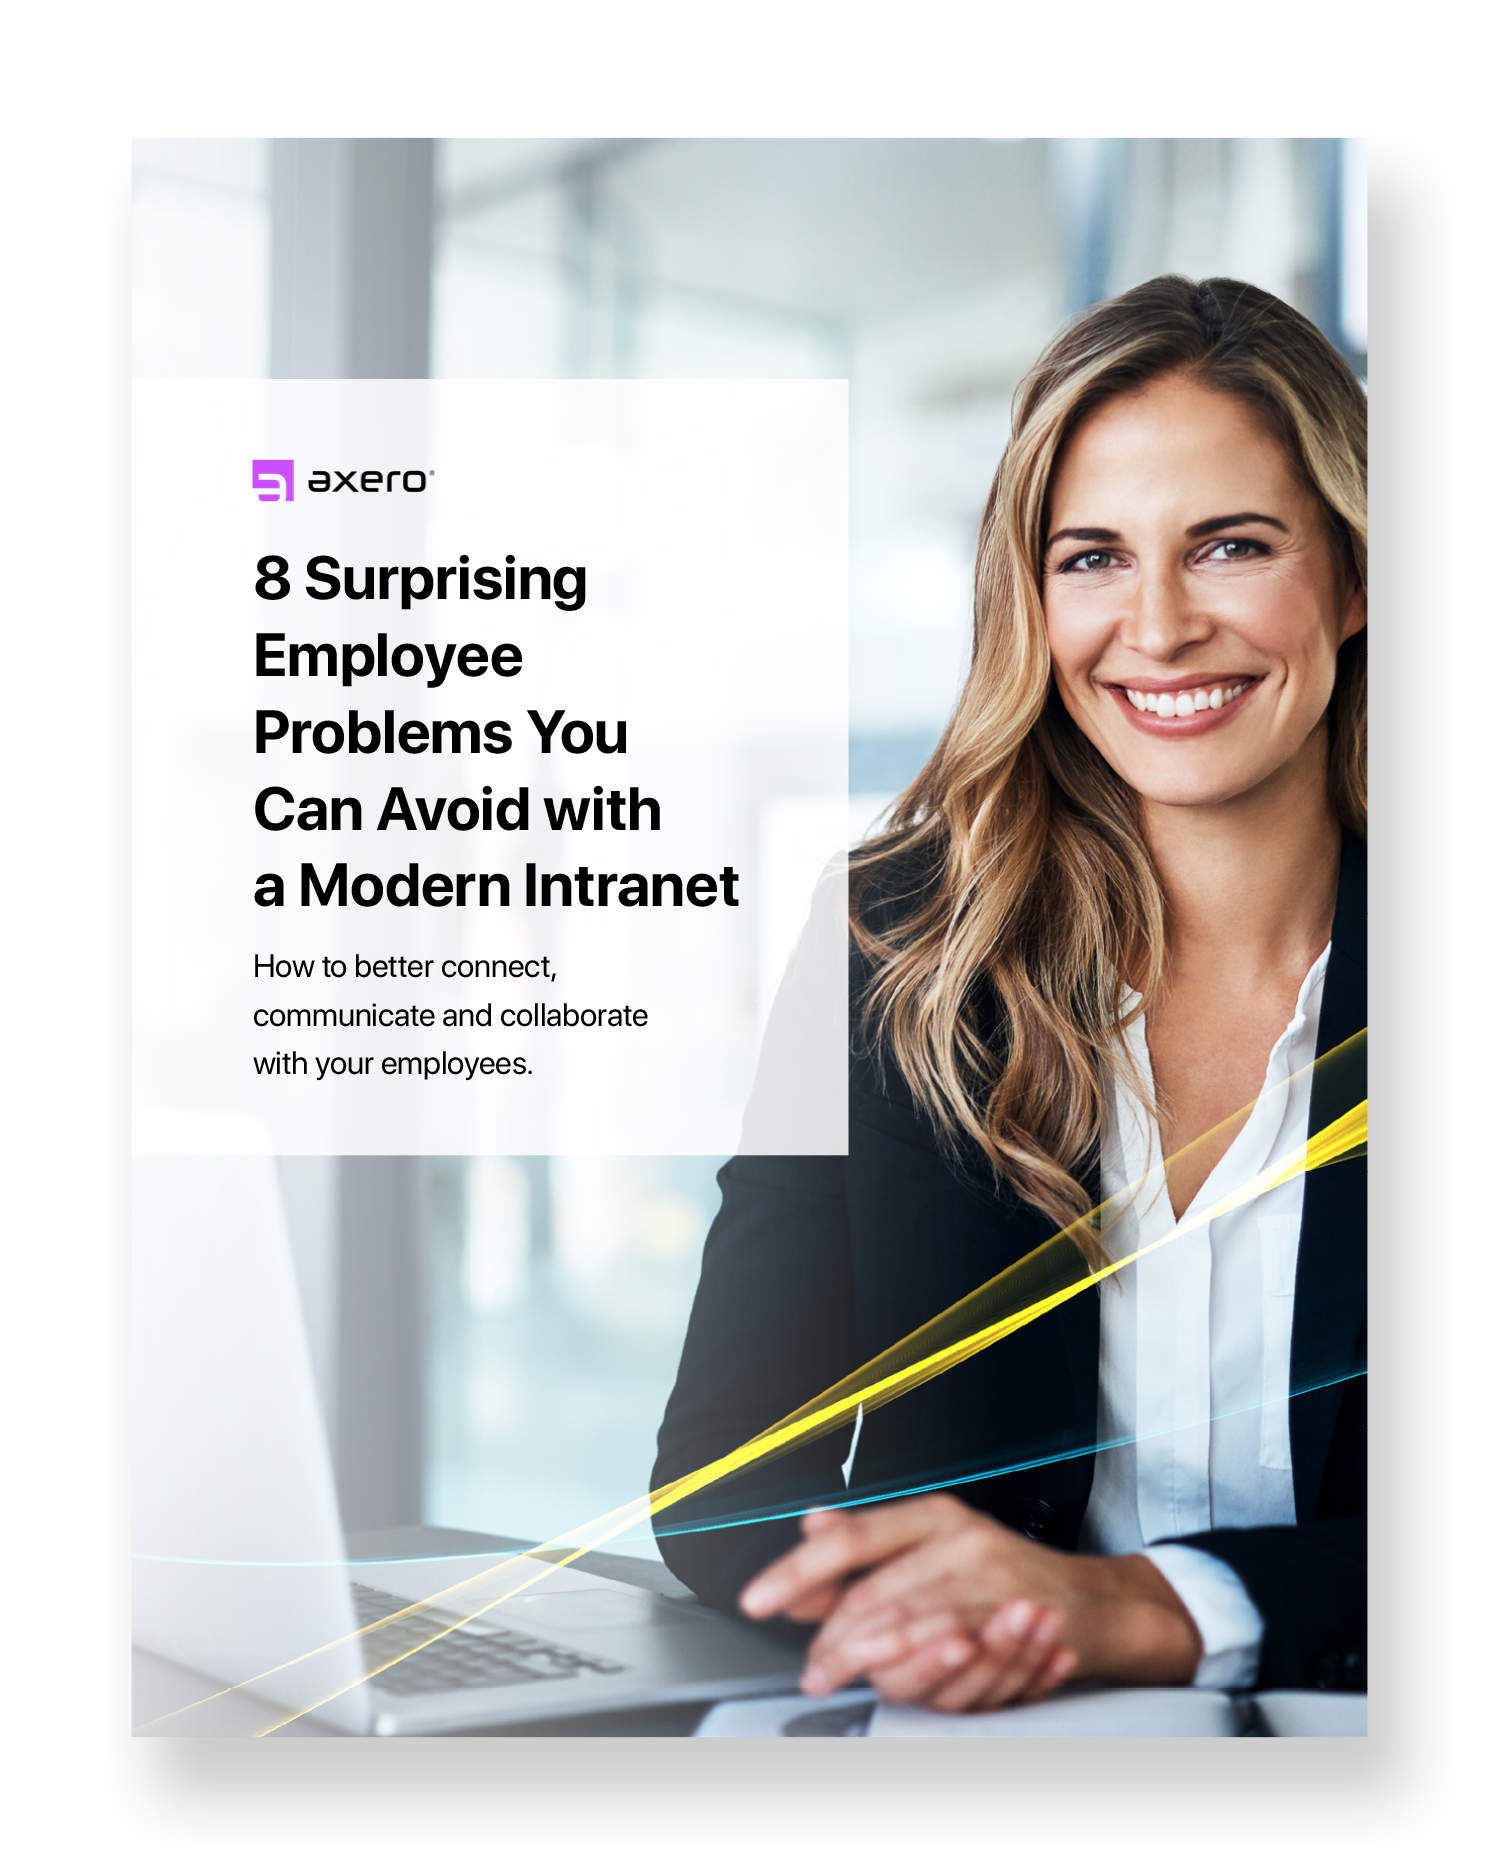 8 Surprising Employee Problems You Can Avoid with a Modern Intranet